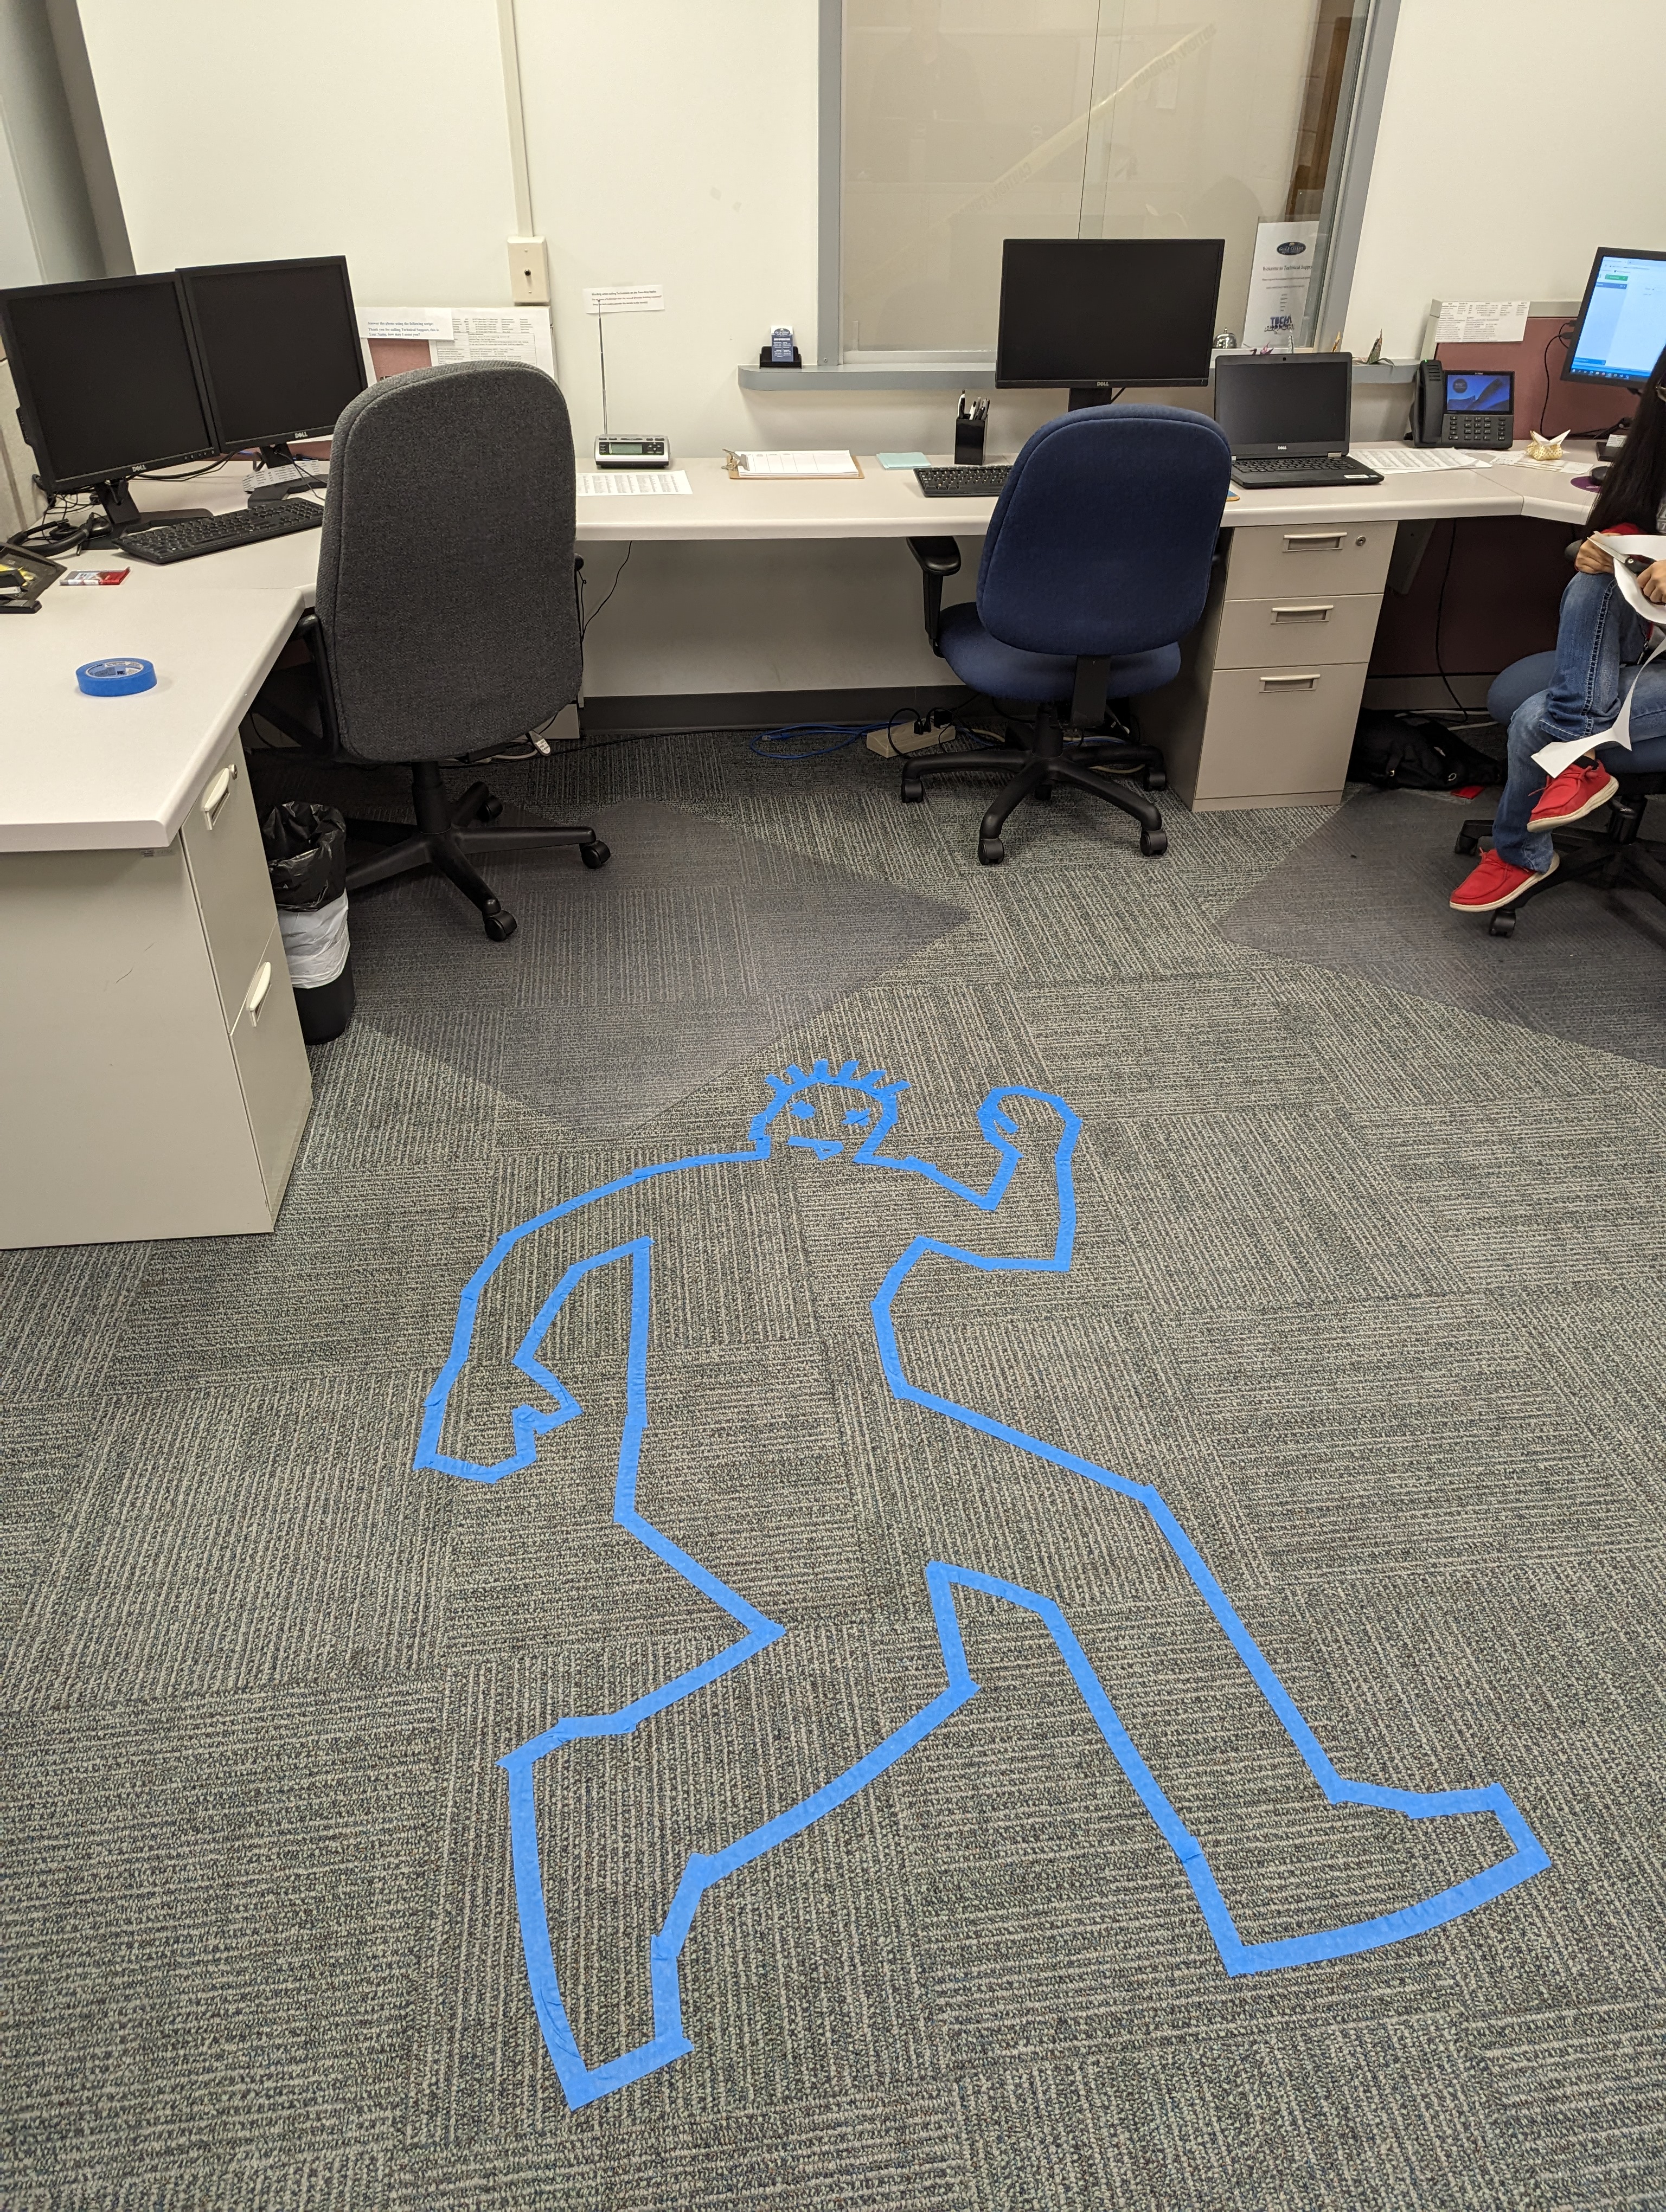 Halloween Decorations in GCSC's ITS Building. Dead body outline at the help desk.